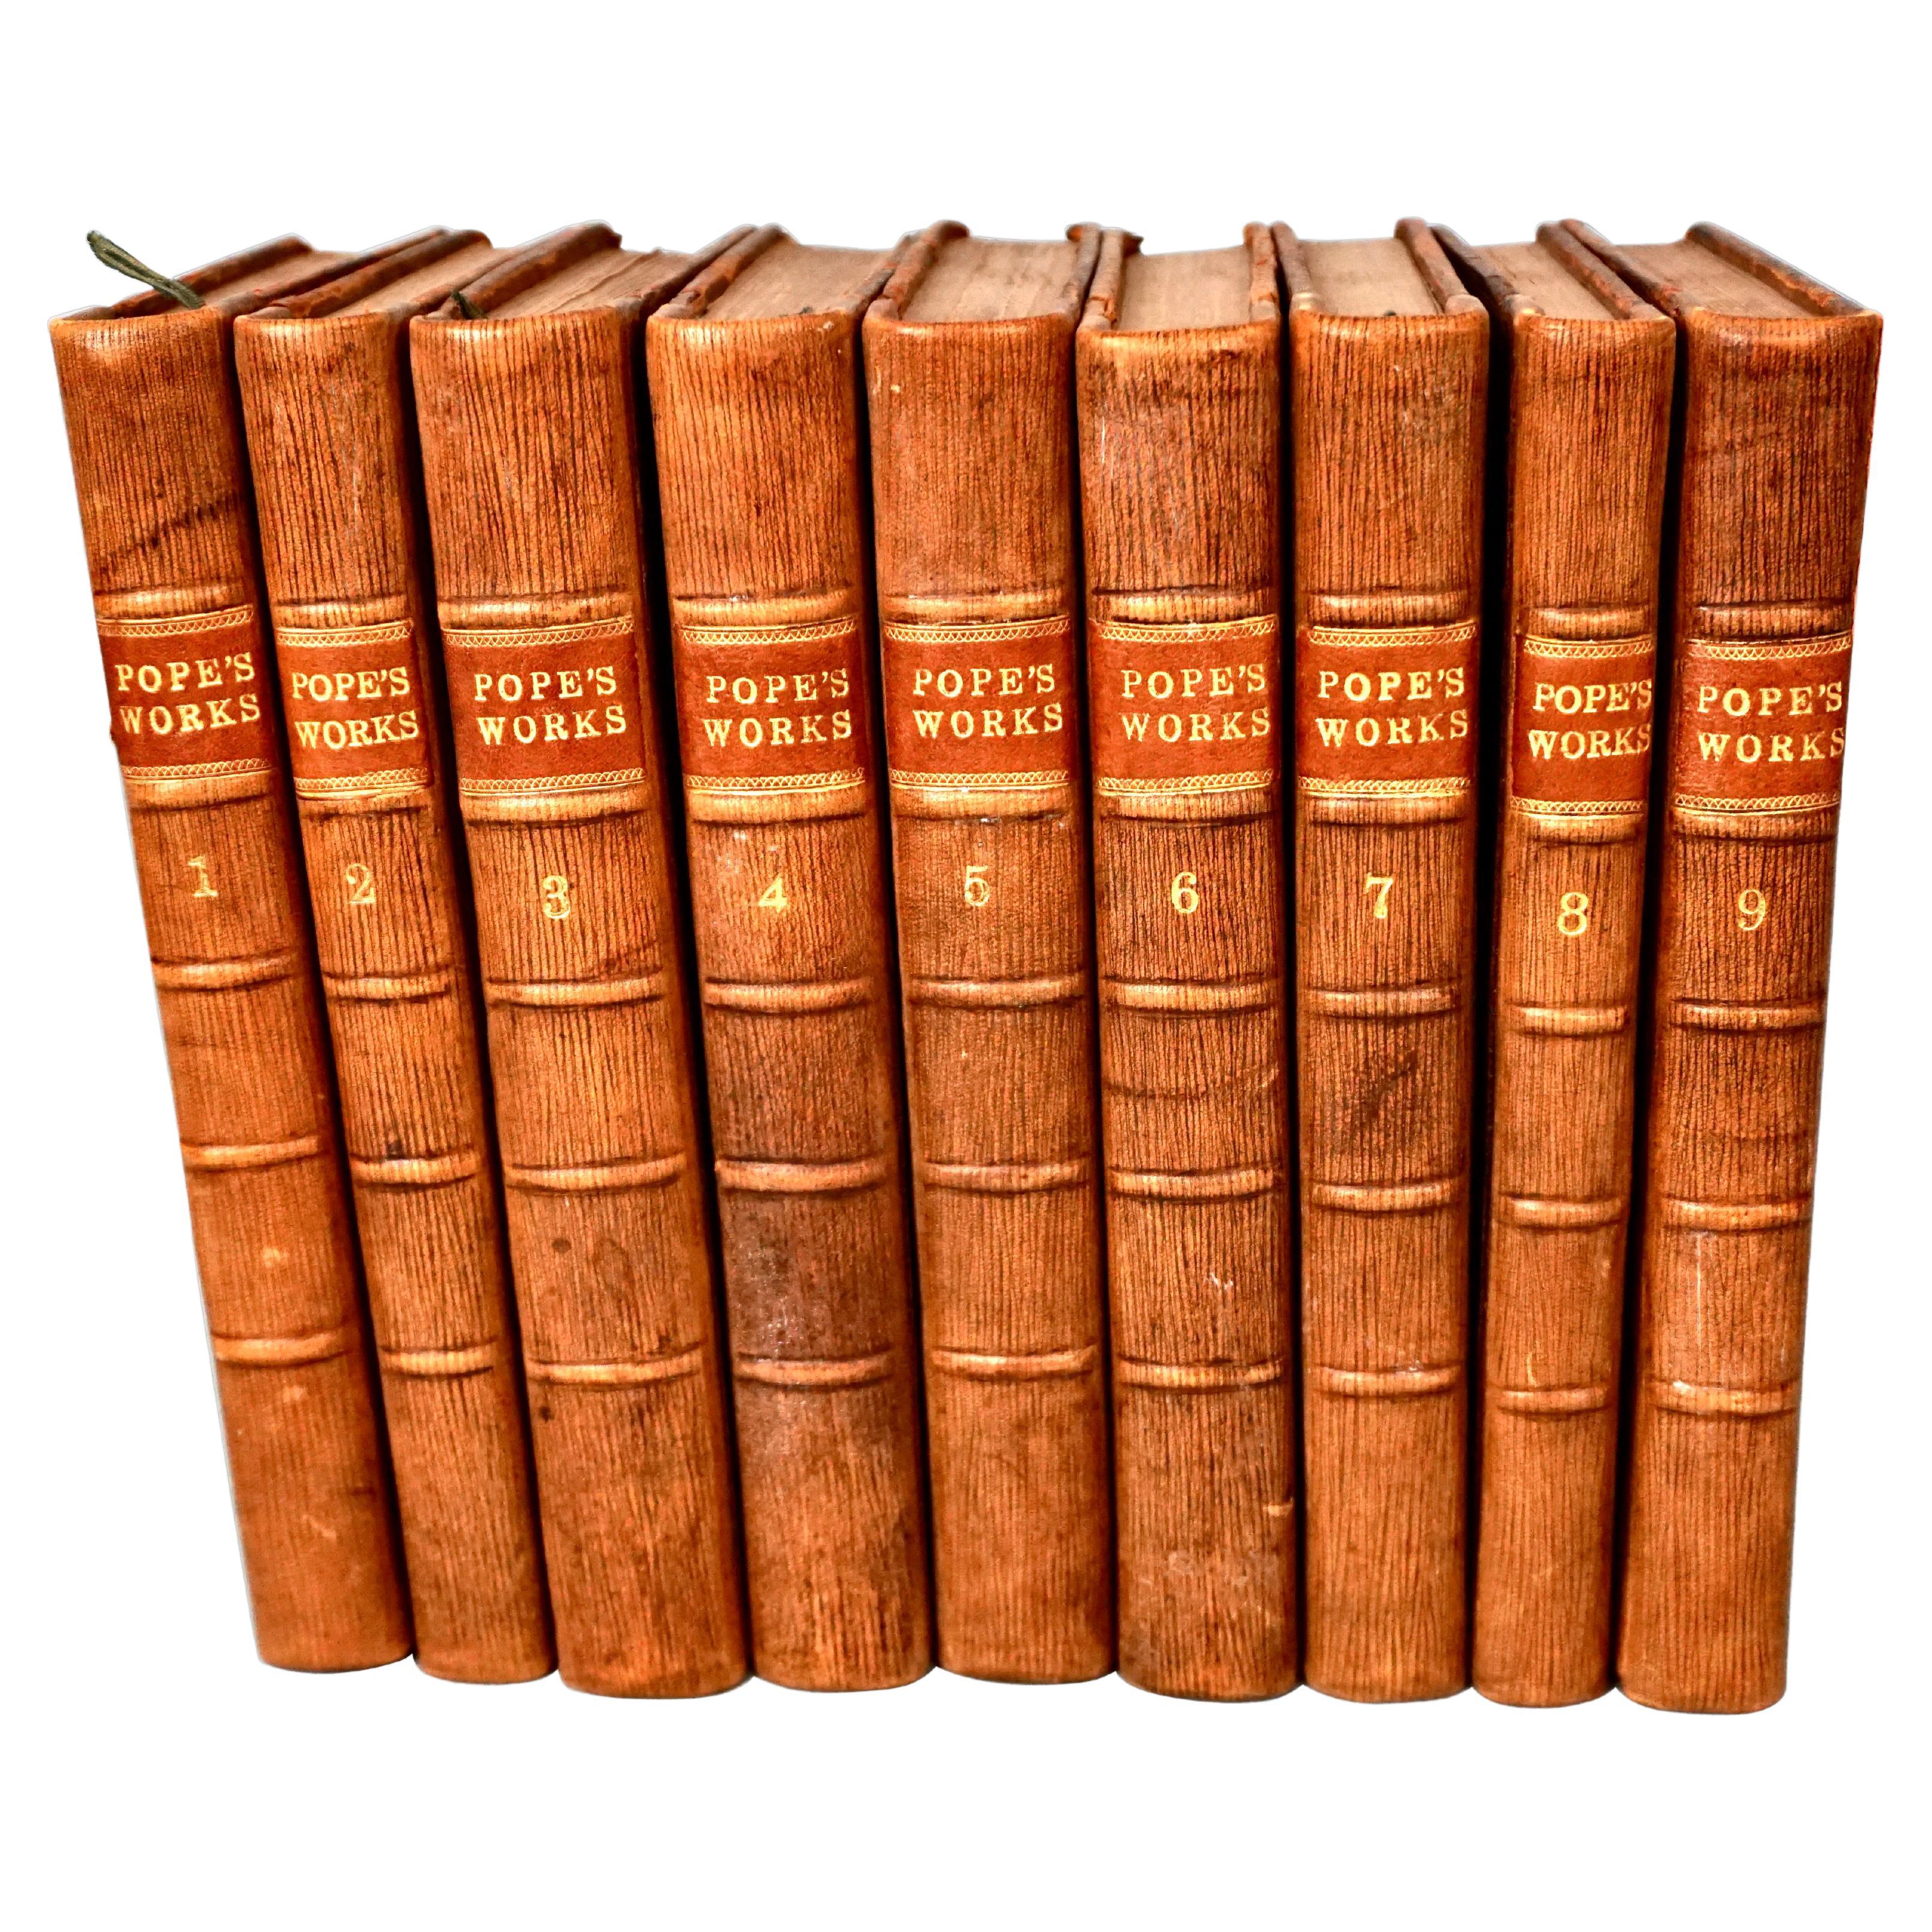 Works of Alexander Pope Leatherbound in 9 Volumes Published 1757